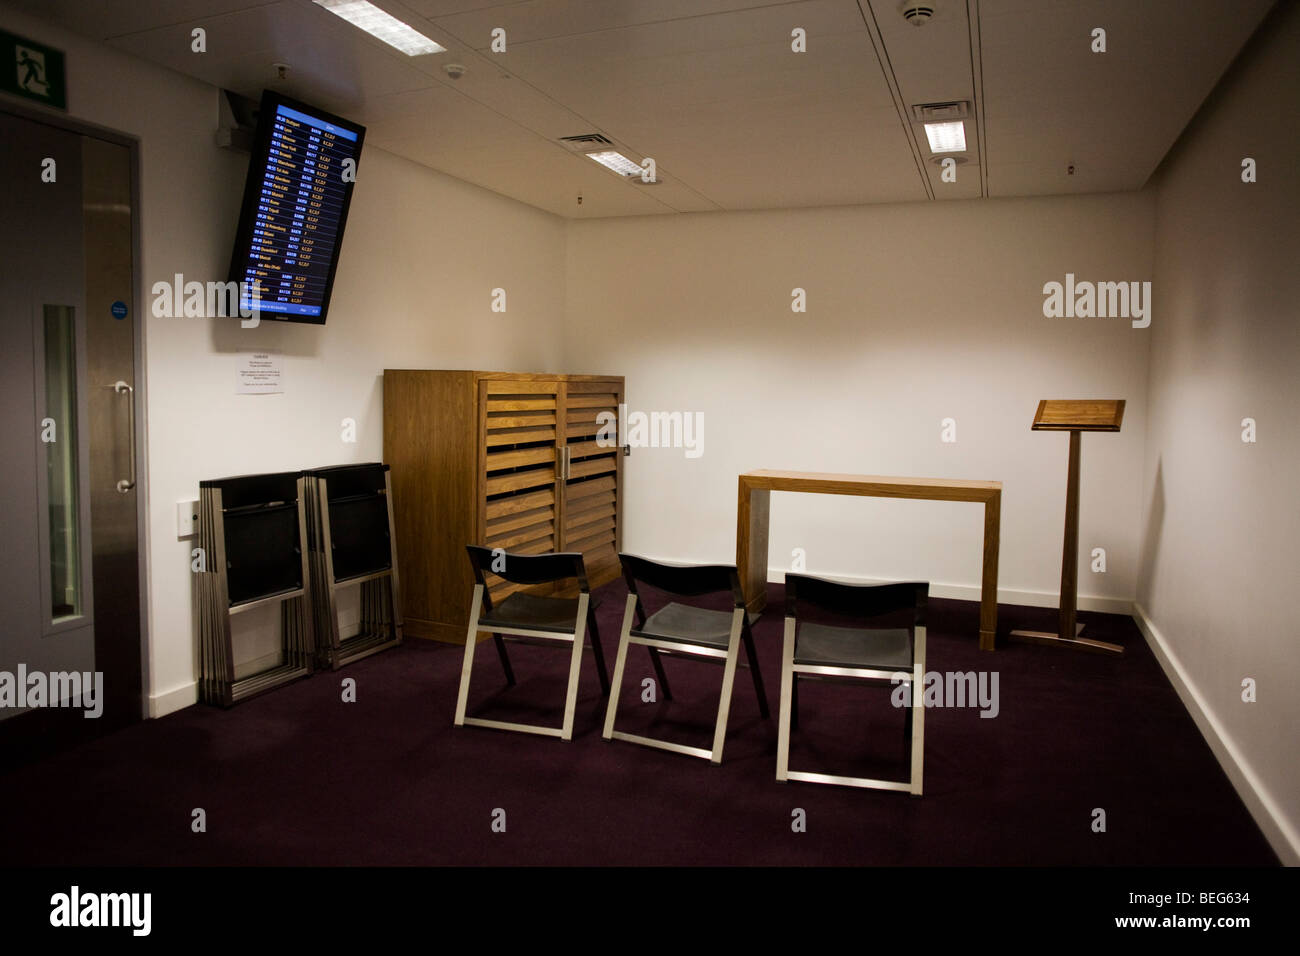 A Multi-faith worship room in the departures section at Heathrow airport's Terminal 5. Stock Photo